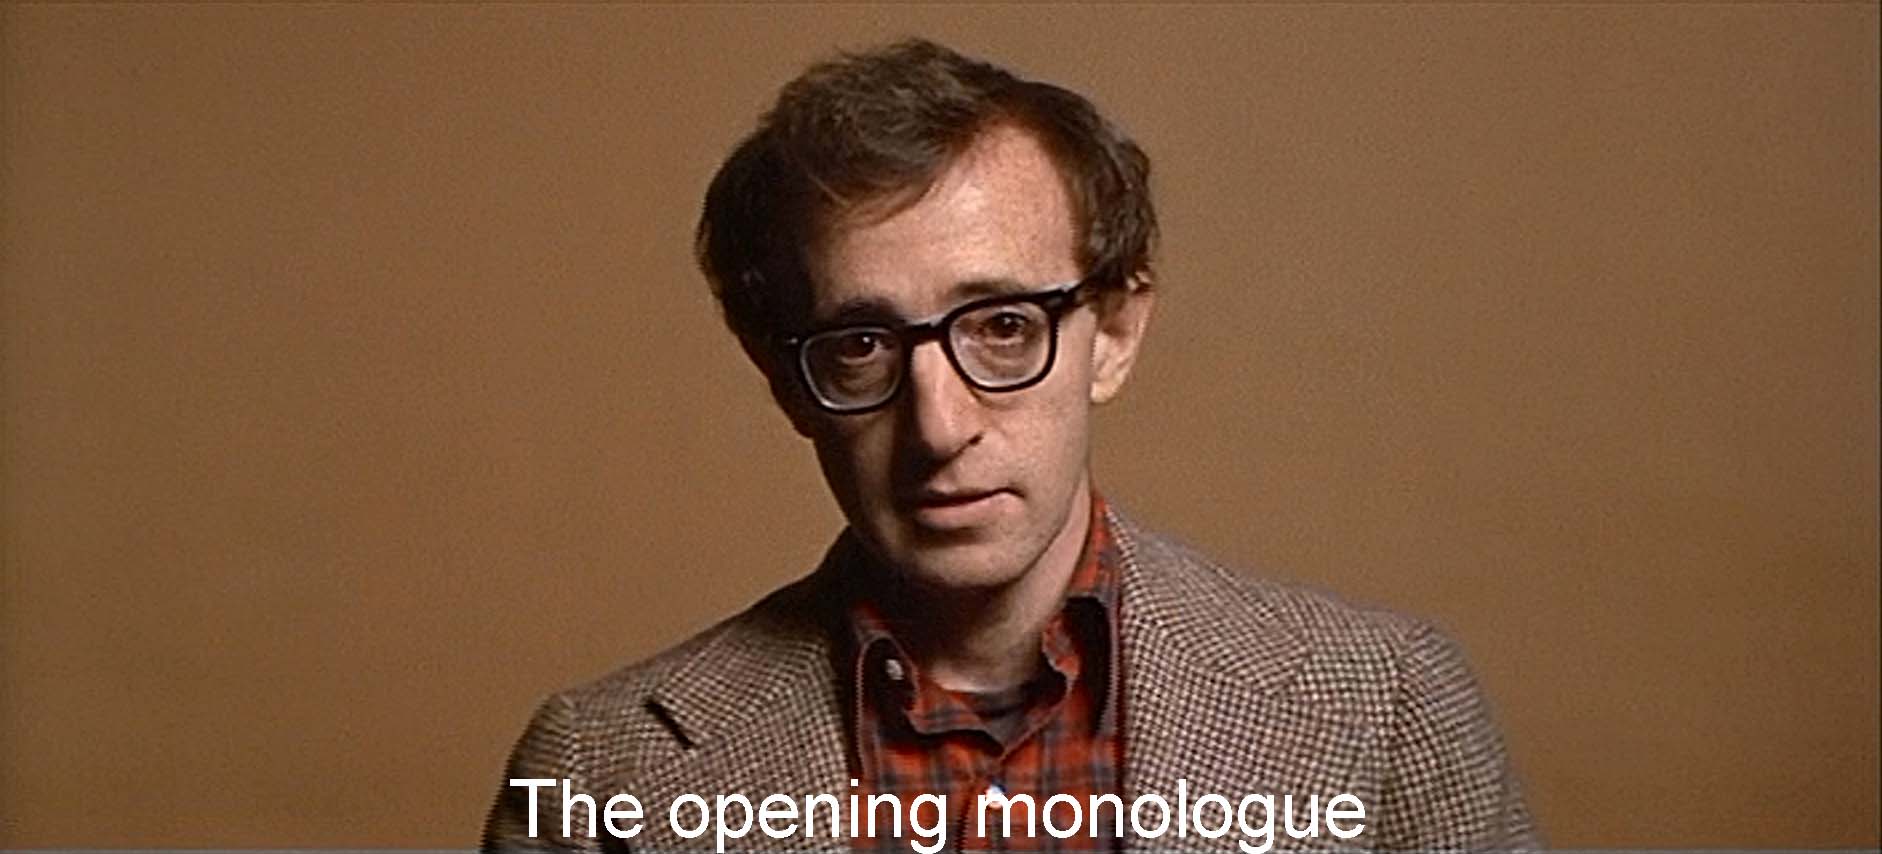  Alvy's opening monologue